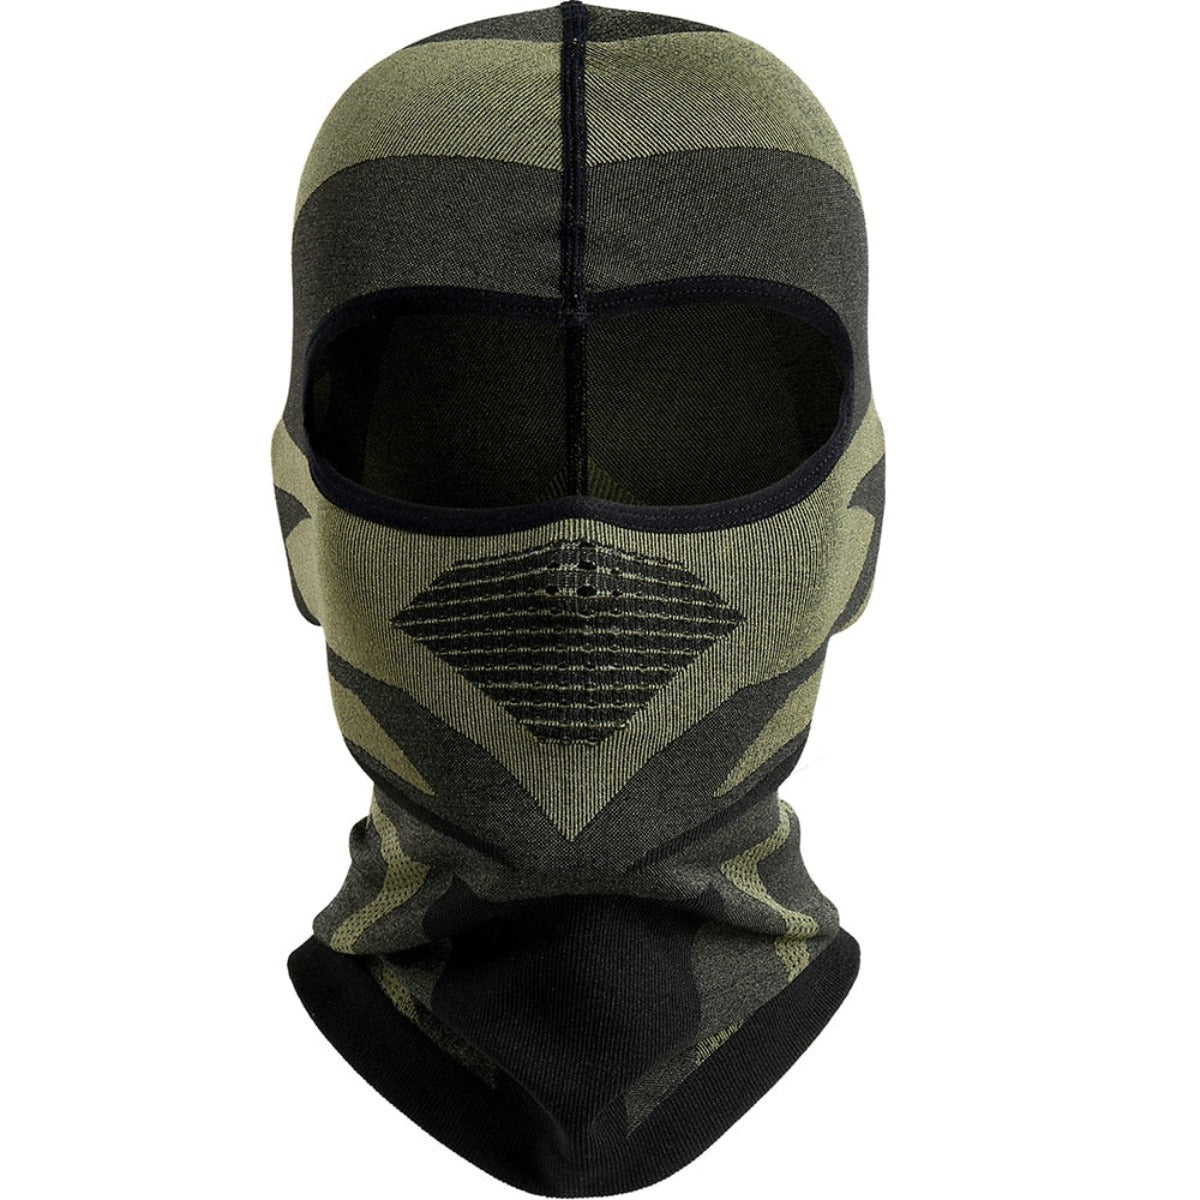 A windproof Breathable Motorcycle Full Face Cover with a hood.